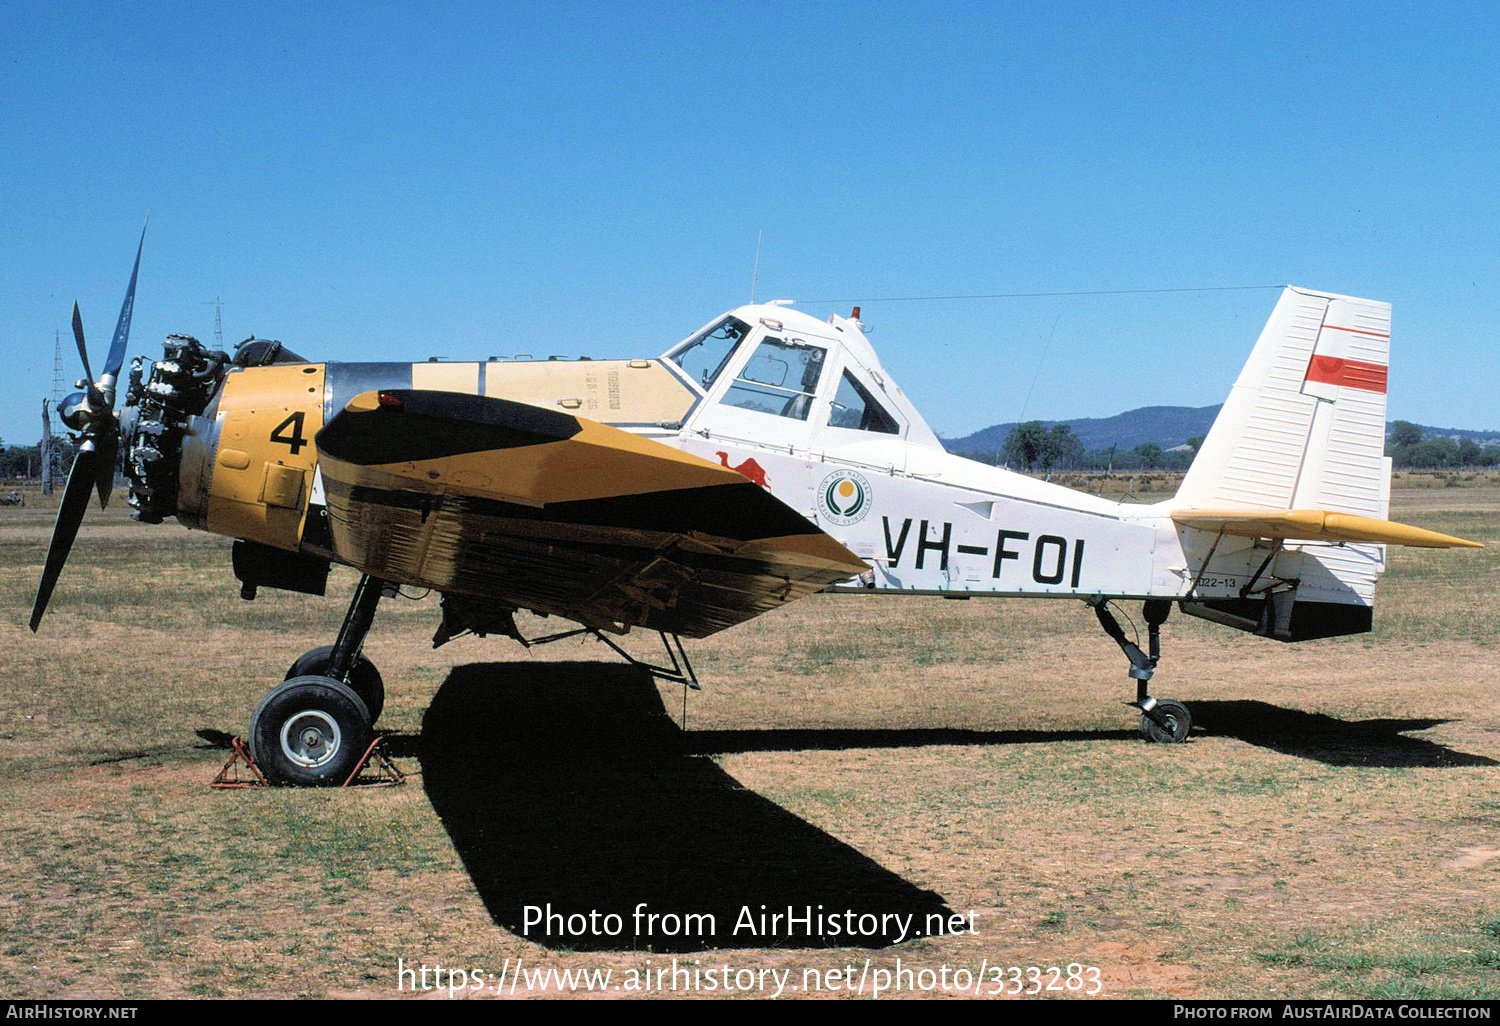 Aircraft Photo of VH-FOI, PZL-Mielec M-18A Dromader, Conservation and  Natural Resources